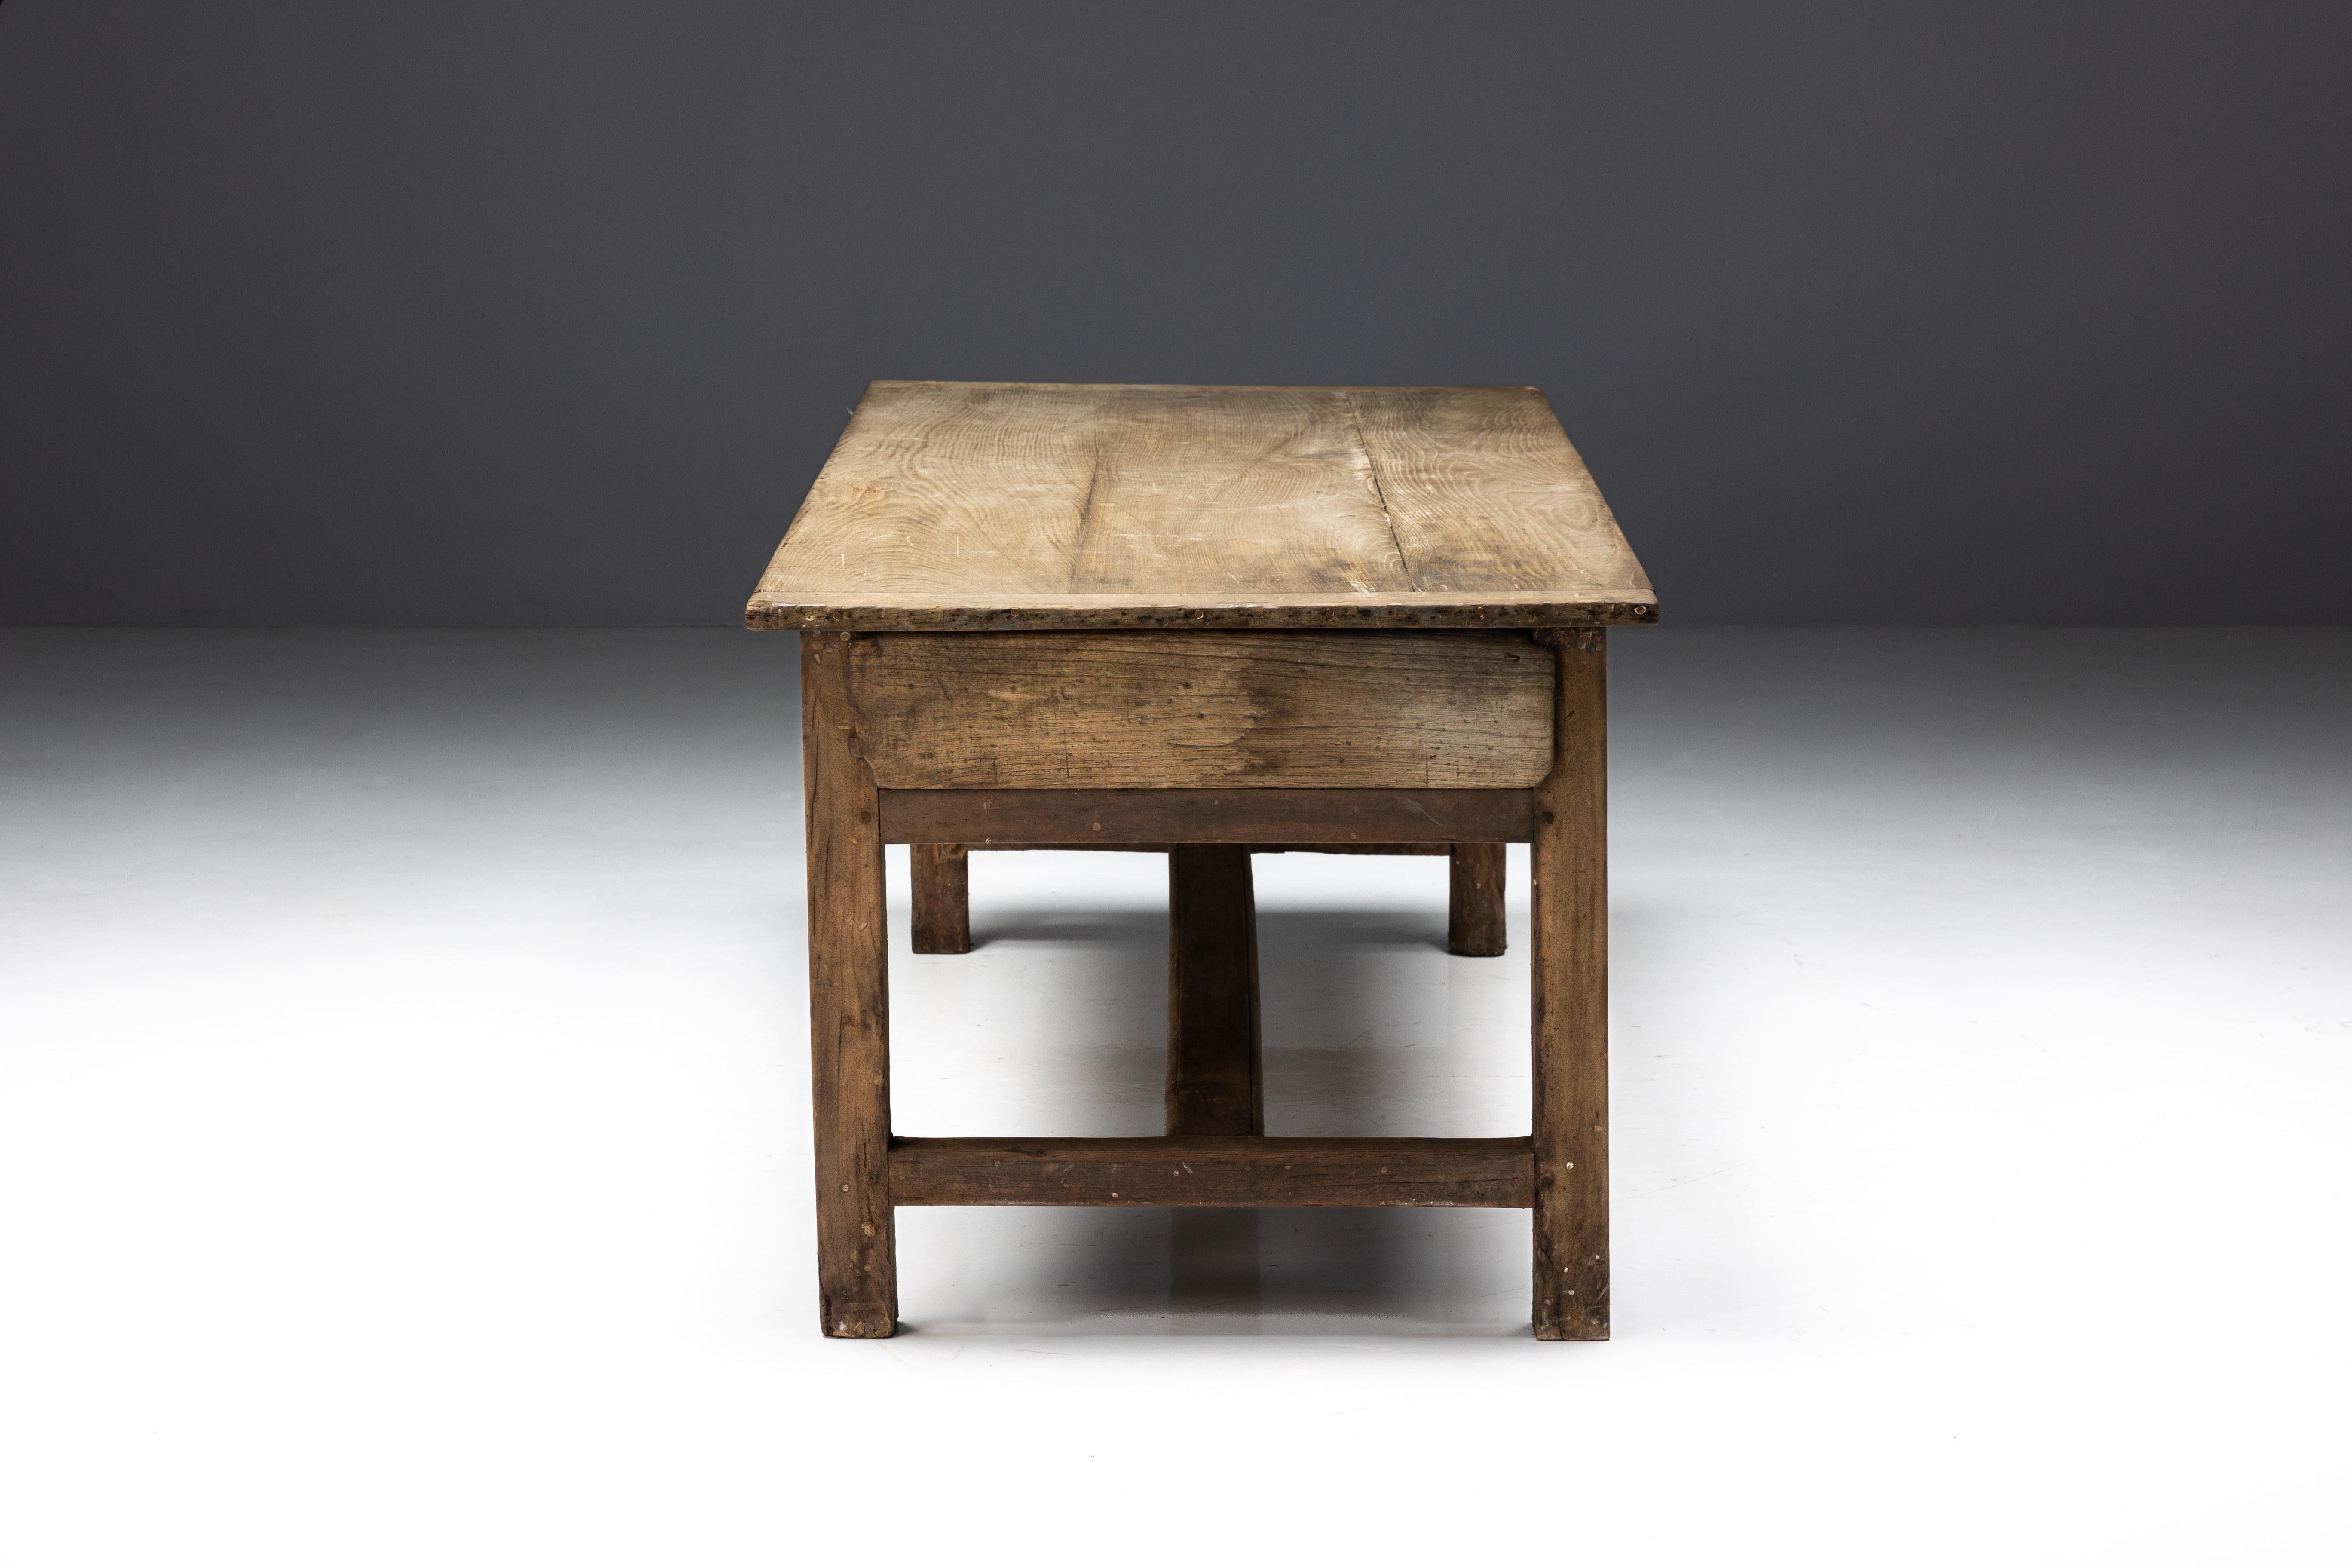 Rustic Art Populaire Dining Table, France, 19th Century In Excellent Condition For Sale In Antwerp, BE